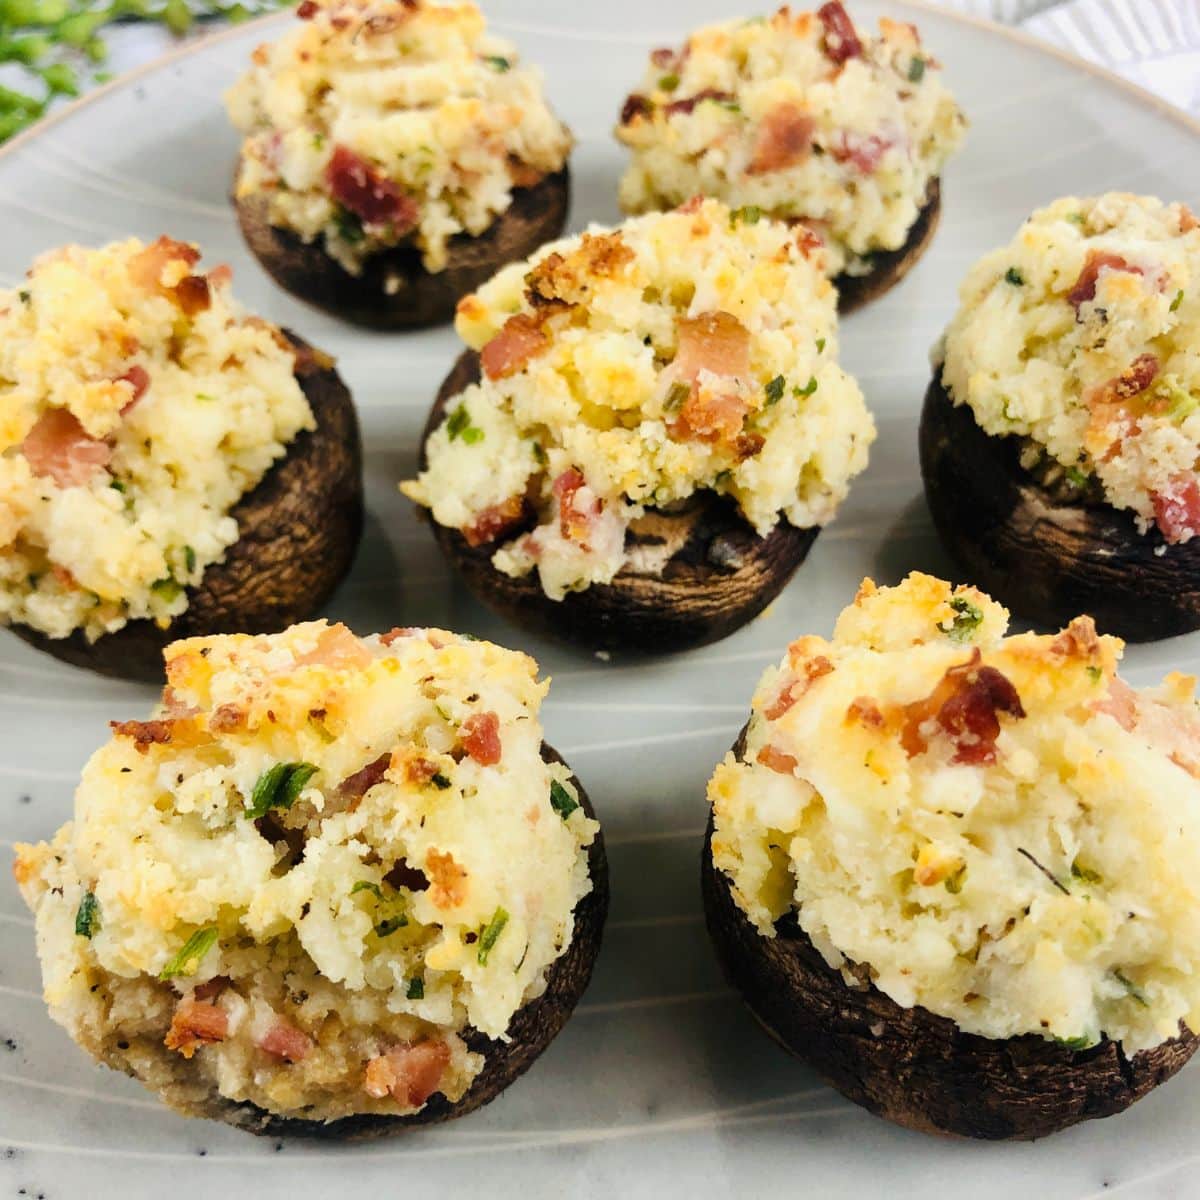 Cheese and bacon stuffed mushrooms on gray plate.